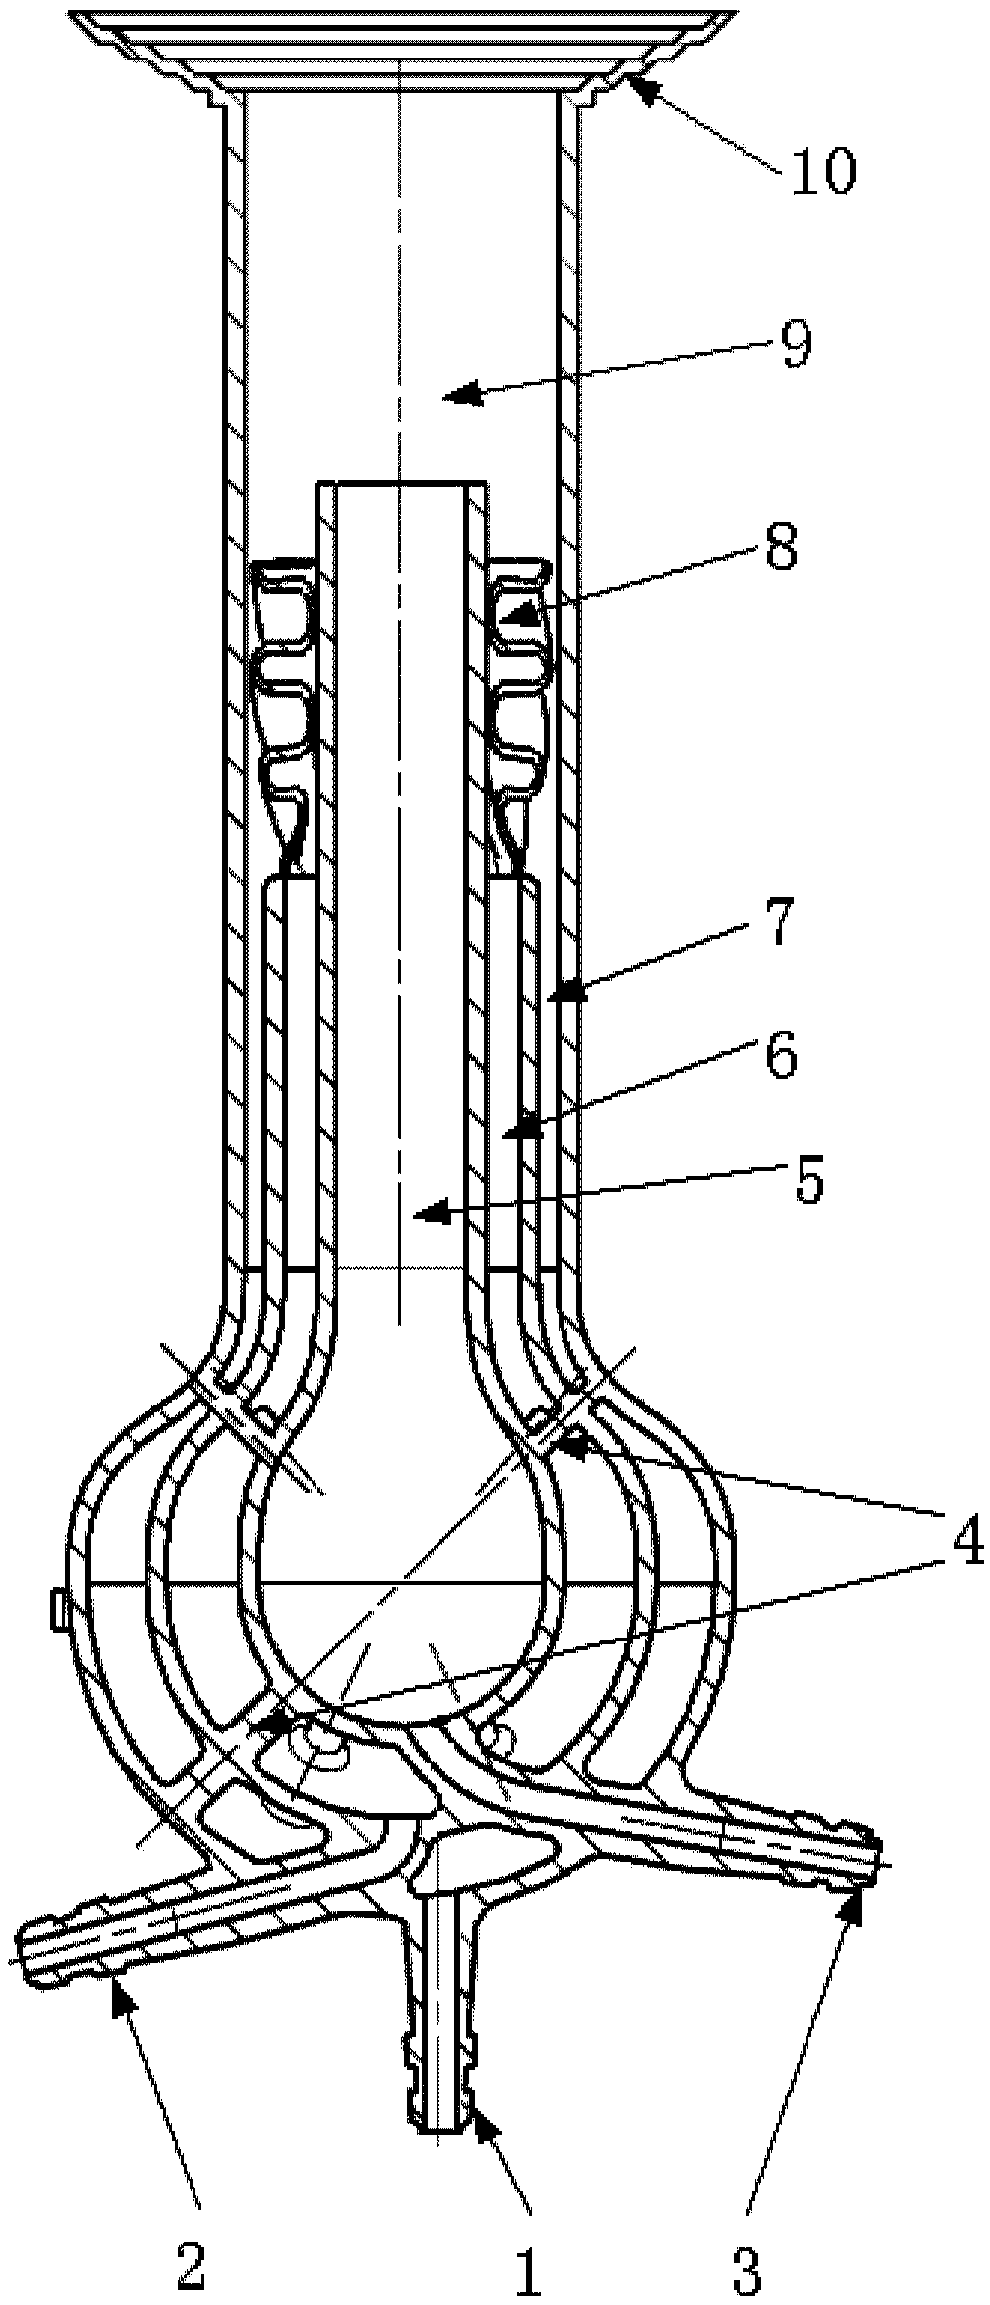 Nozzle, nozzle array and burner for widening tempering margin